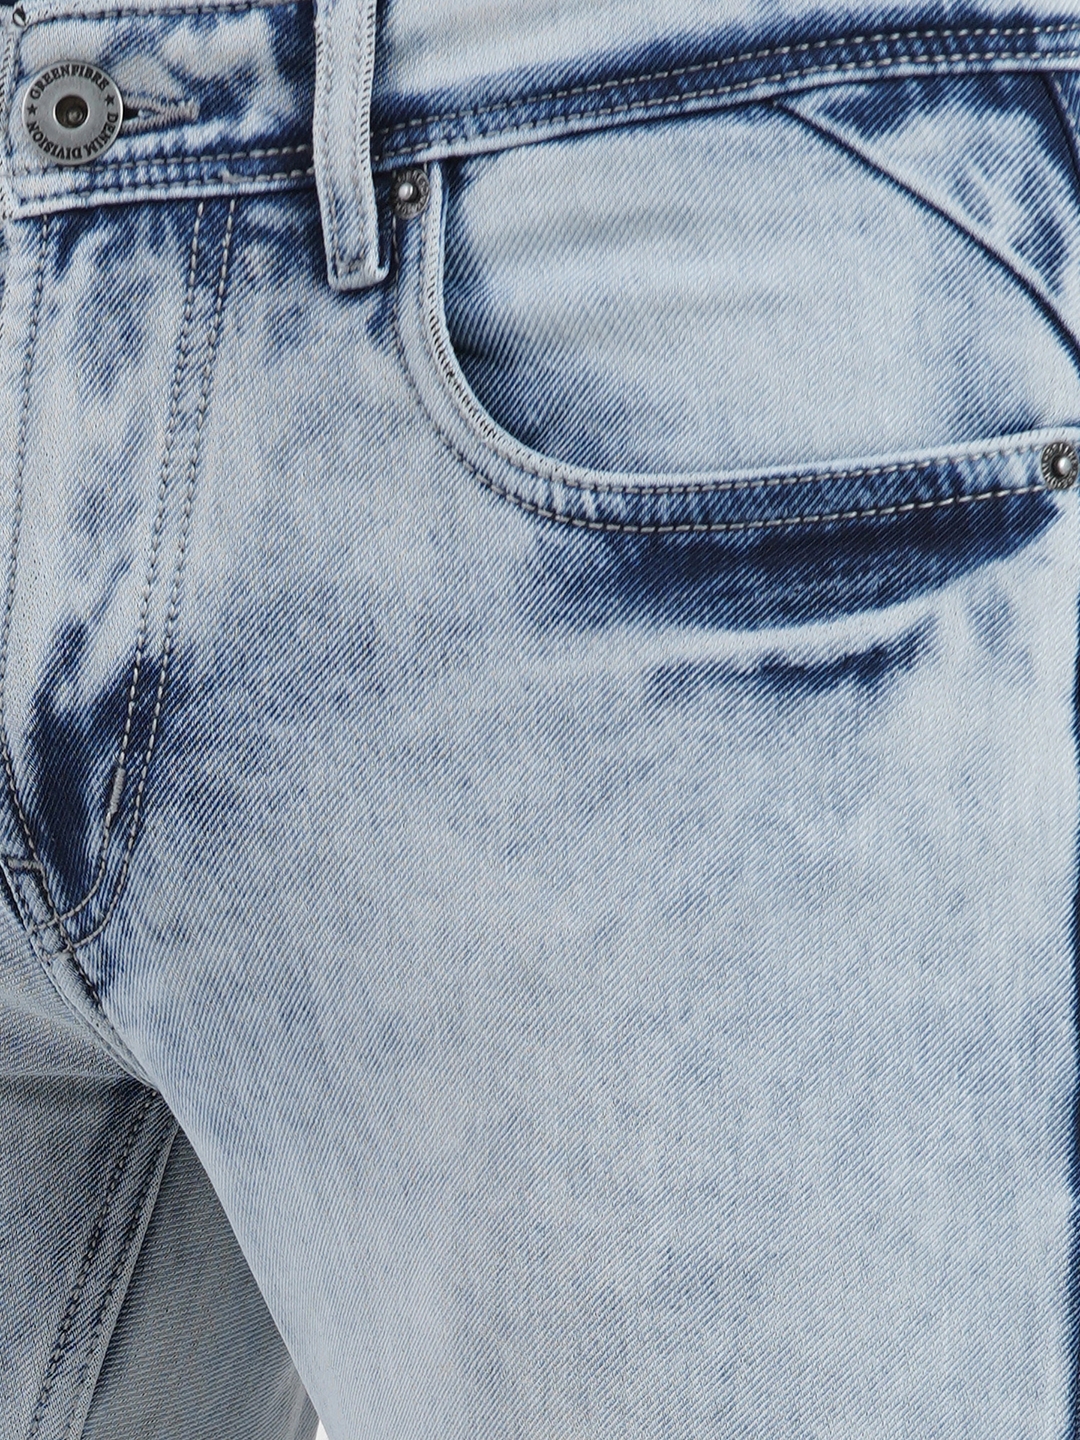 Greenfibre | Light Blue Washed Narrow Fit Jeans | Greenfibre 4